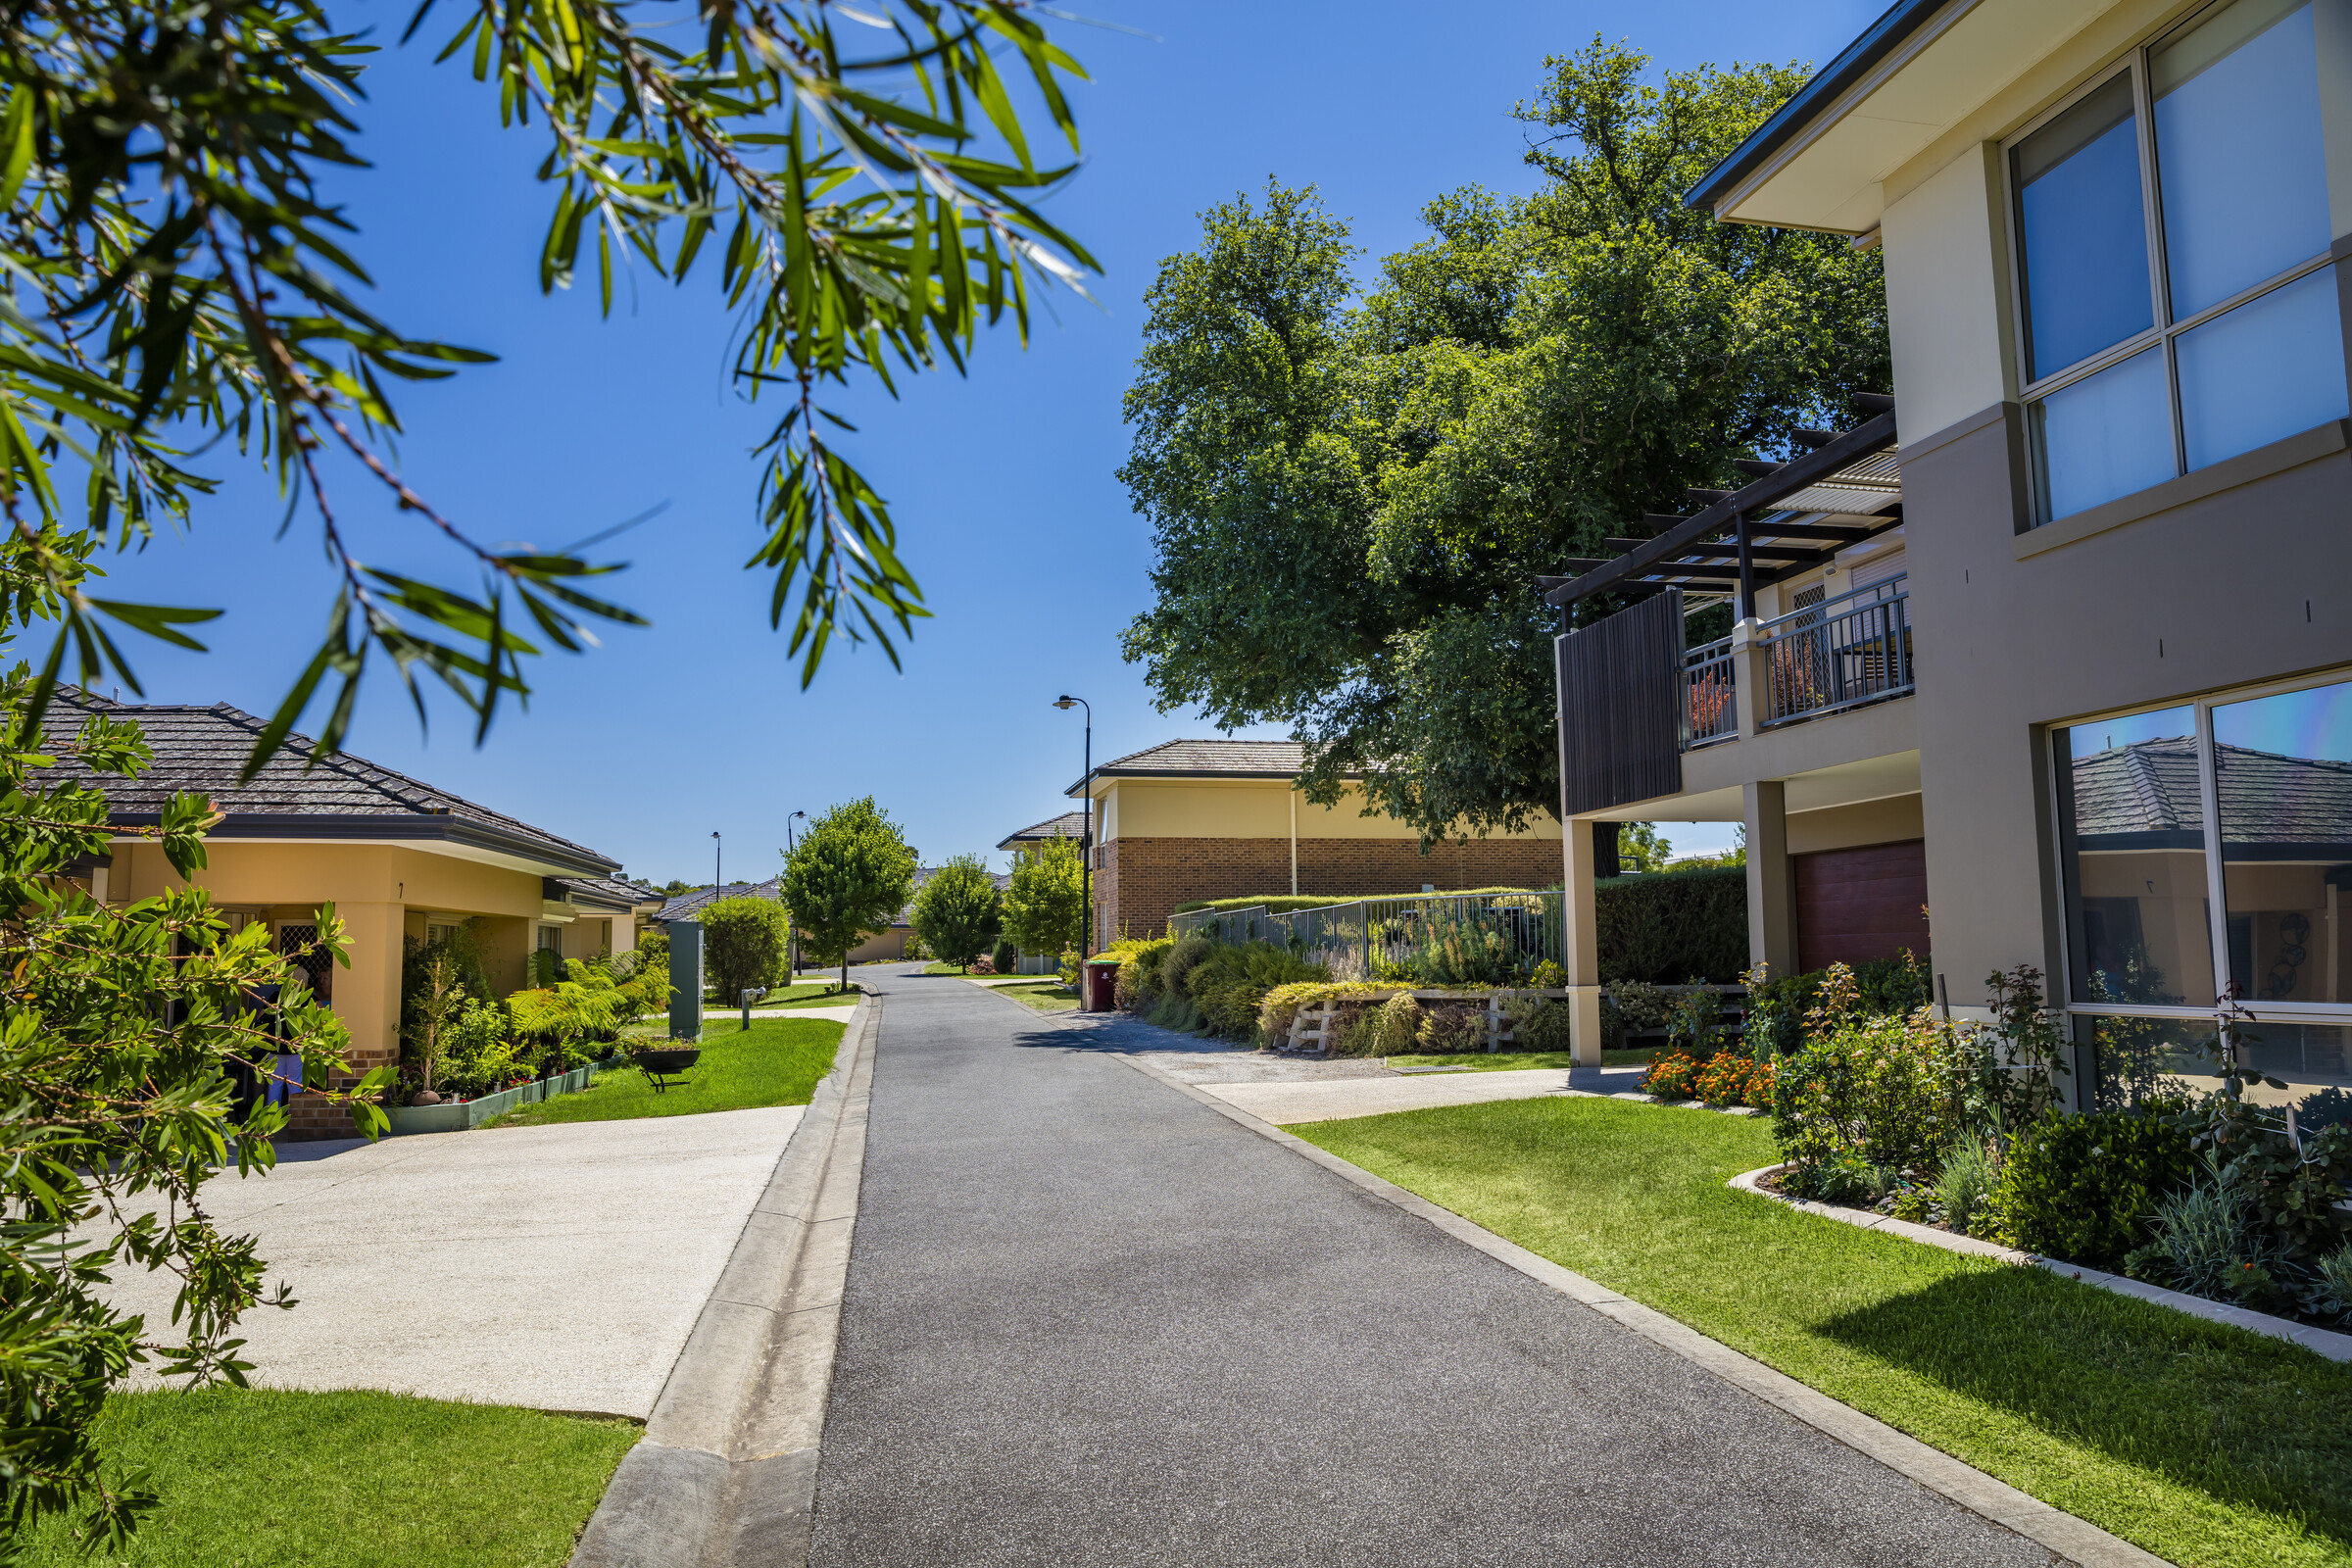 Woodlands Park village roadway lined with homes, trees, gardens and lawns